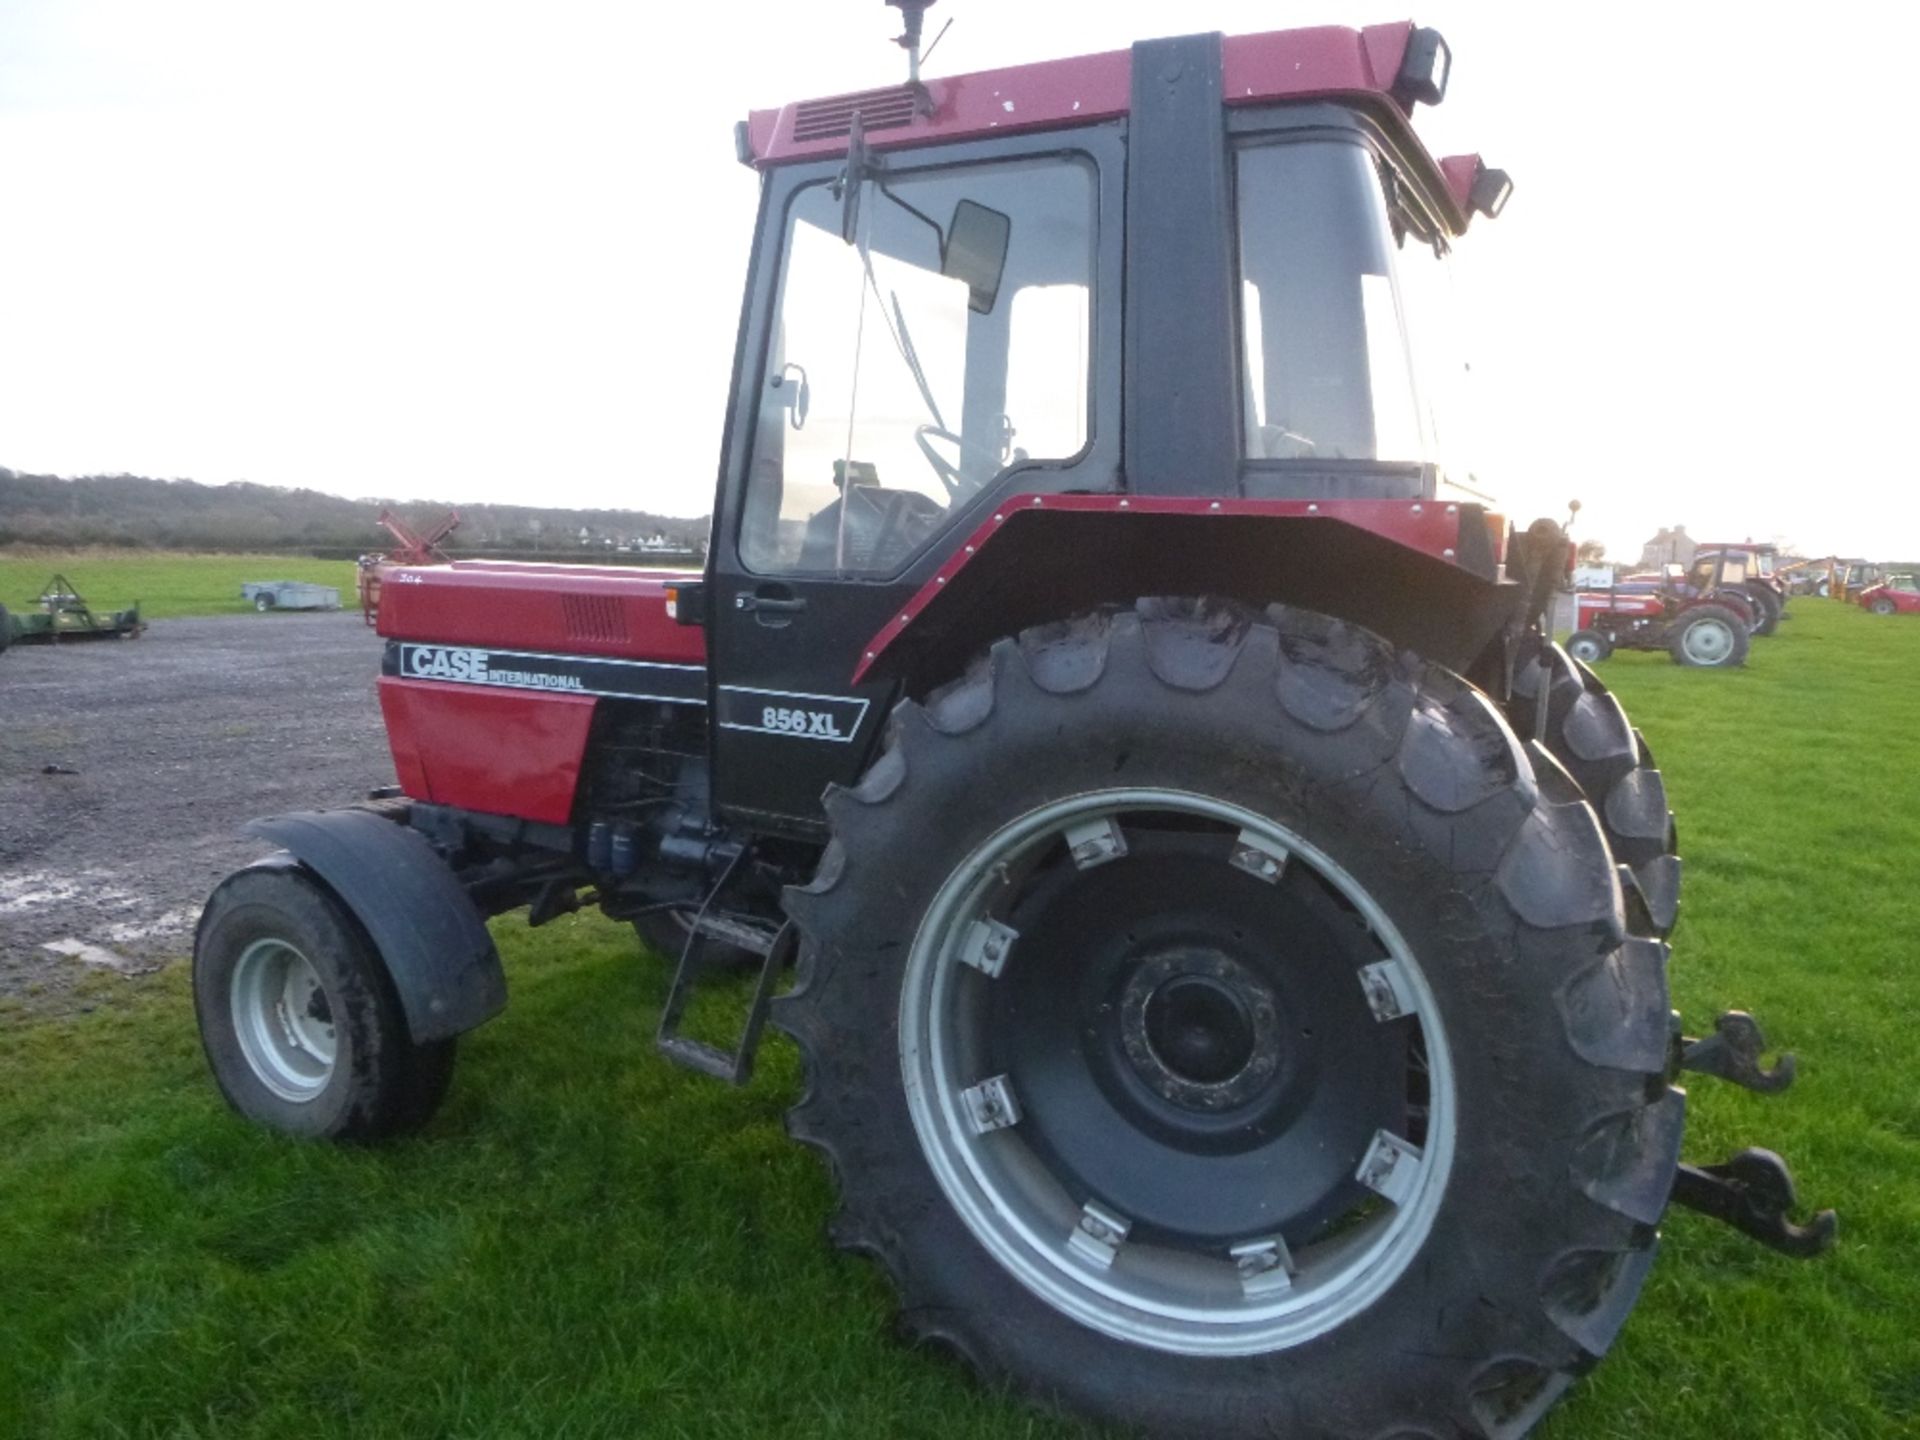 Case 856XL 2wd Tractor. 3050 hrs - date of reg 31/12/89
V5 Applied for. - Image 8 of 13